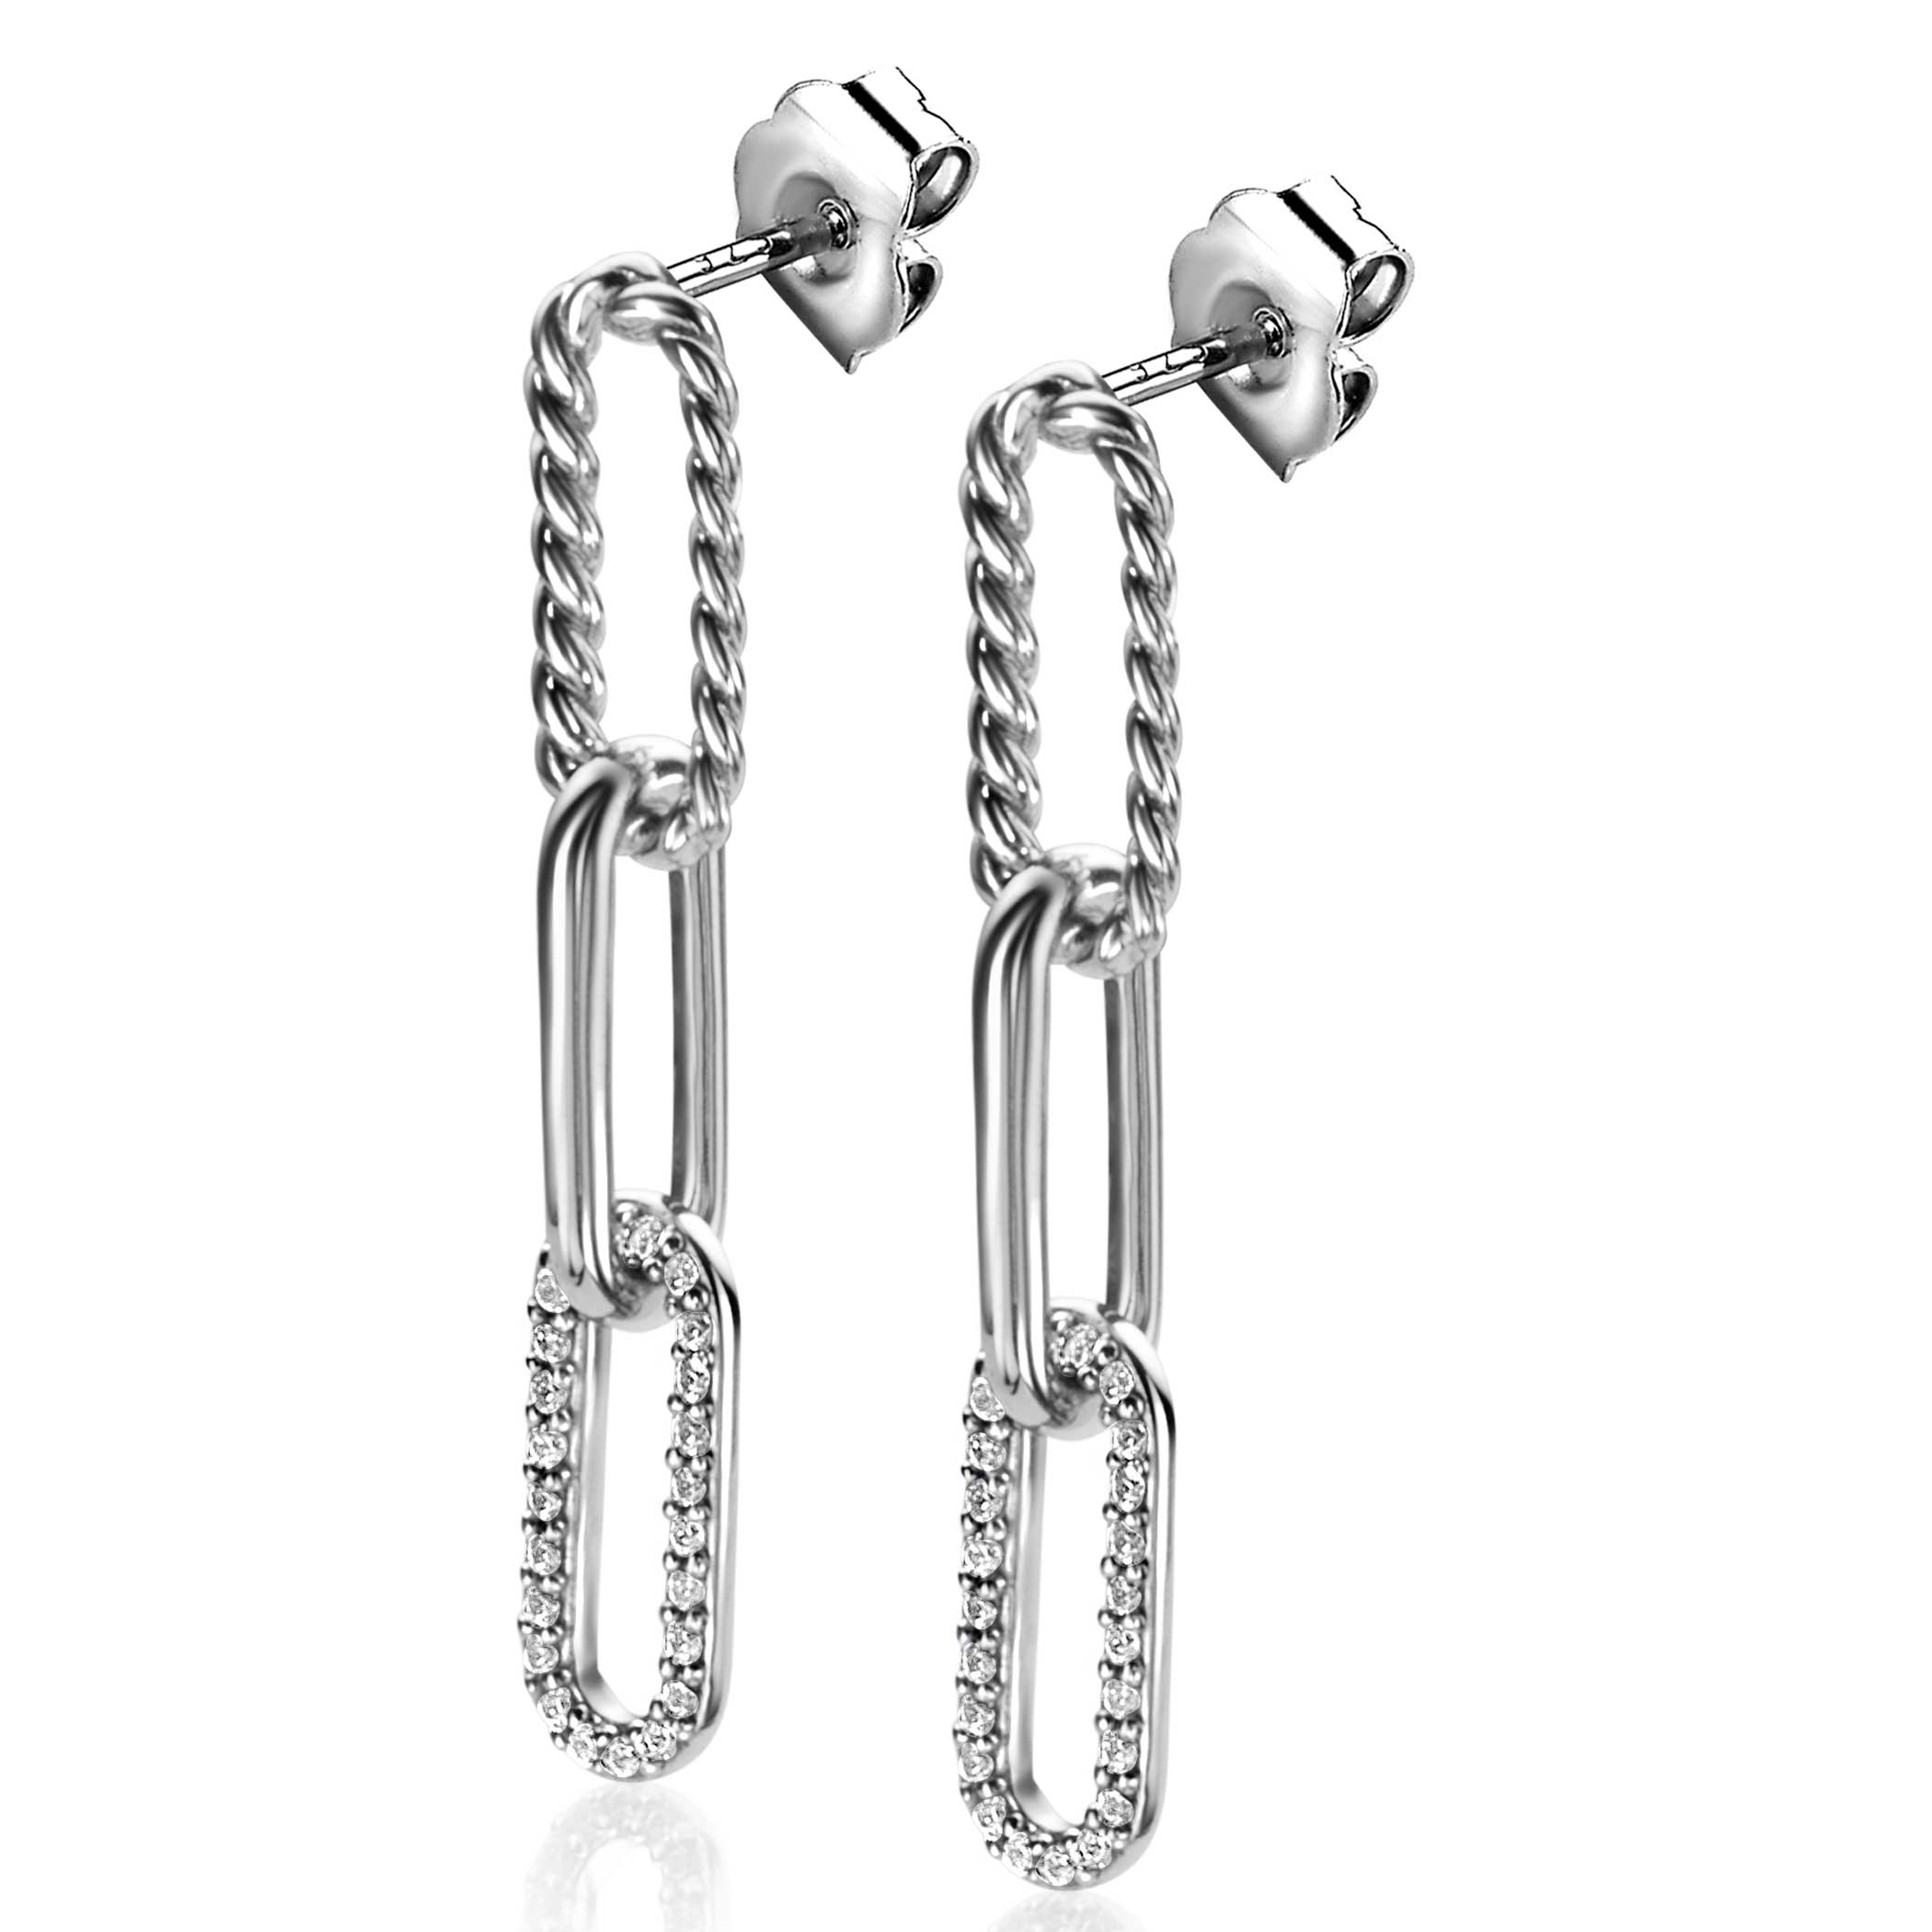 30mm ZINZI Sterling Silver Long Earrings with 3 Paperclip Chains: Smooth, Twist Design and White Zirconias ZIO2330